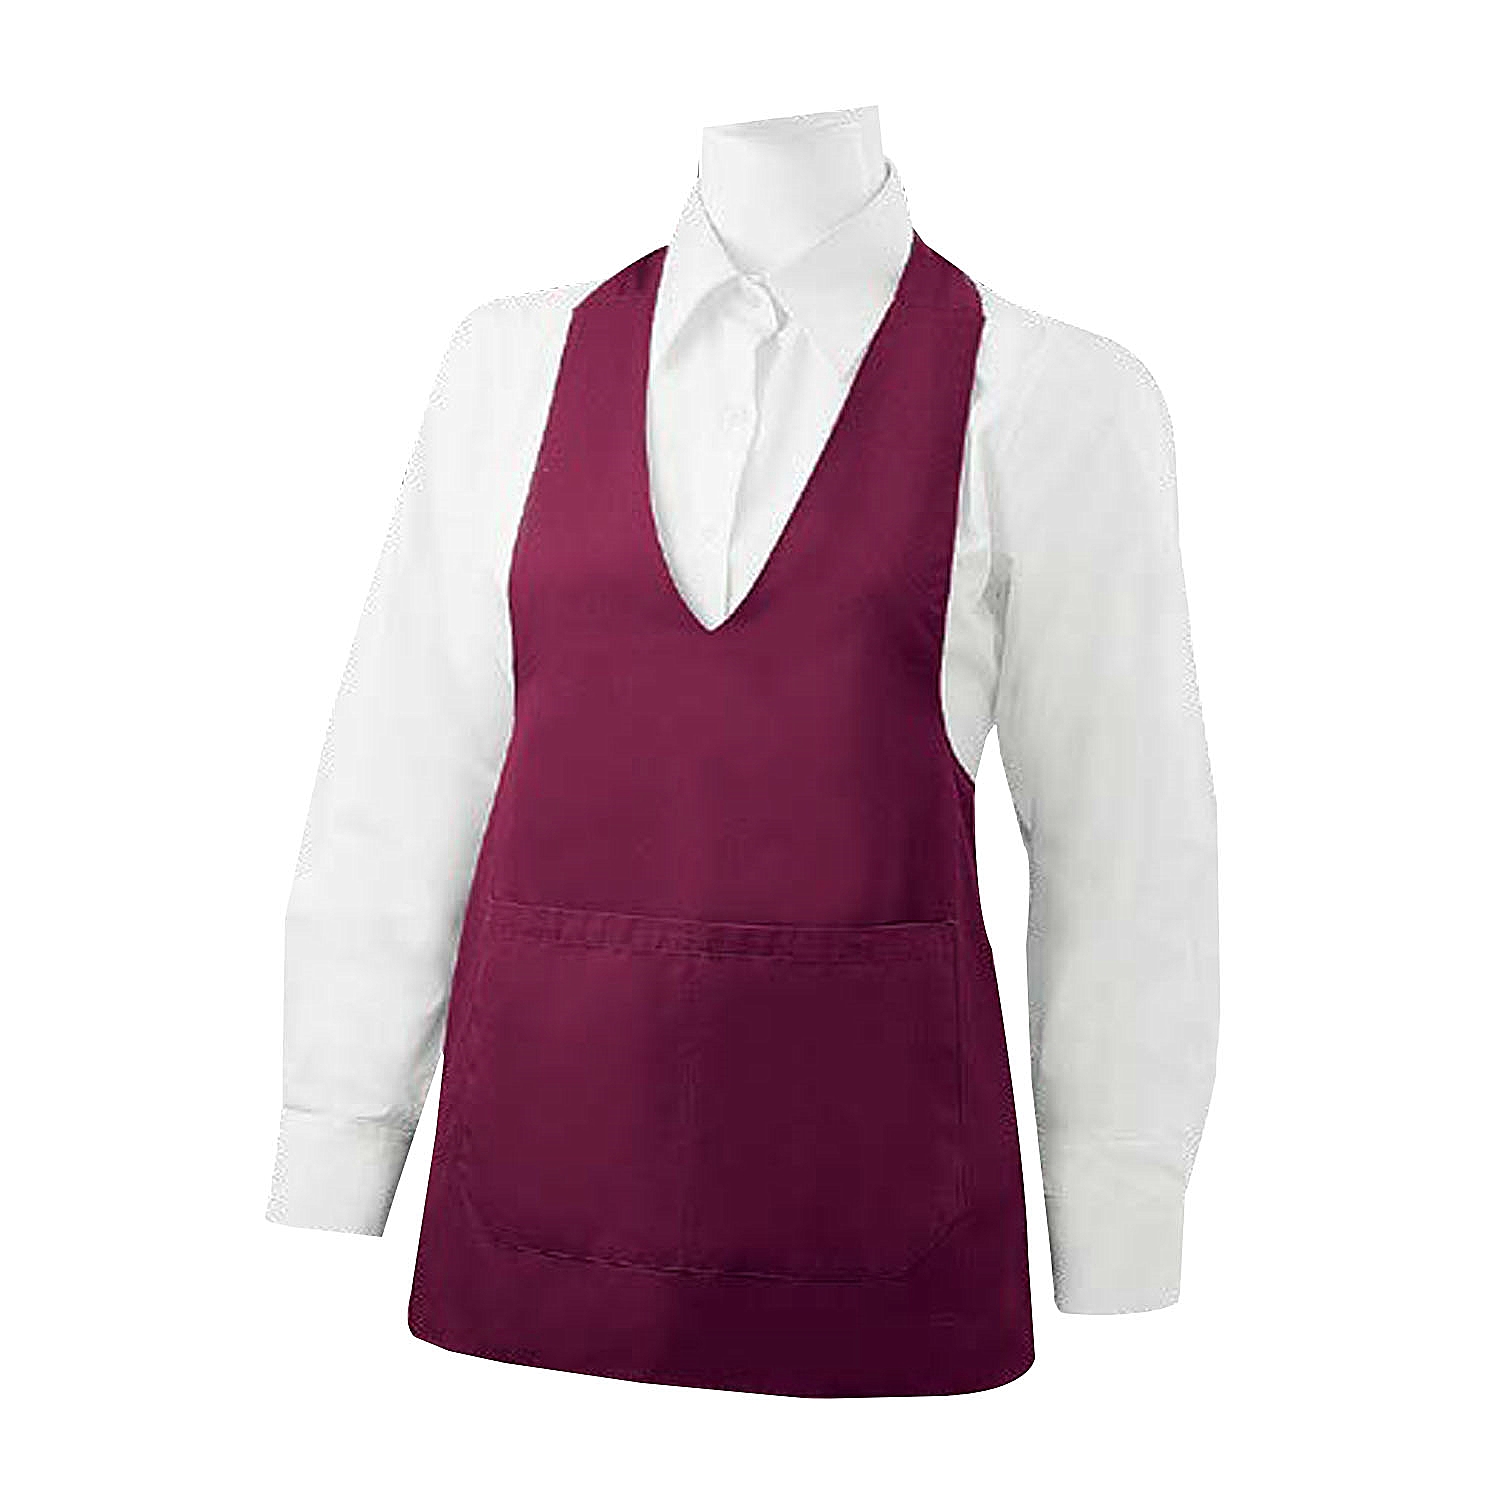 APRON CLEANING WITH POCKET 65mm*70mm WORK UNIFORM CLINIC HOSPITAL CLEANING VETERINARY SANITATION HOSTELRY Ref.8602